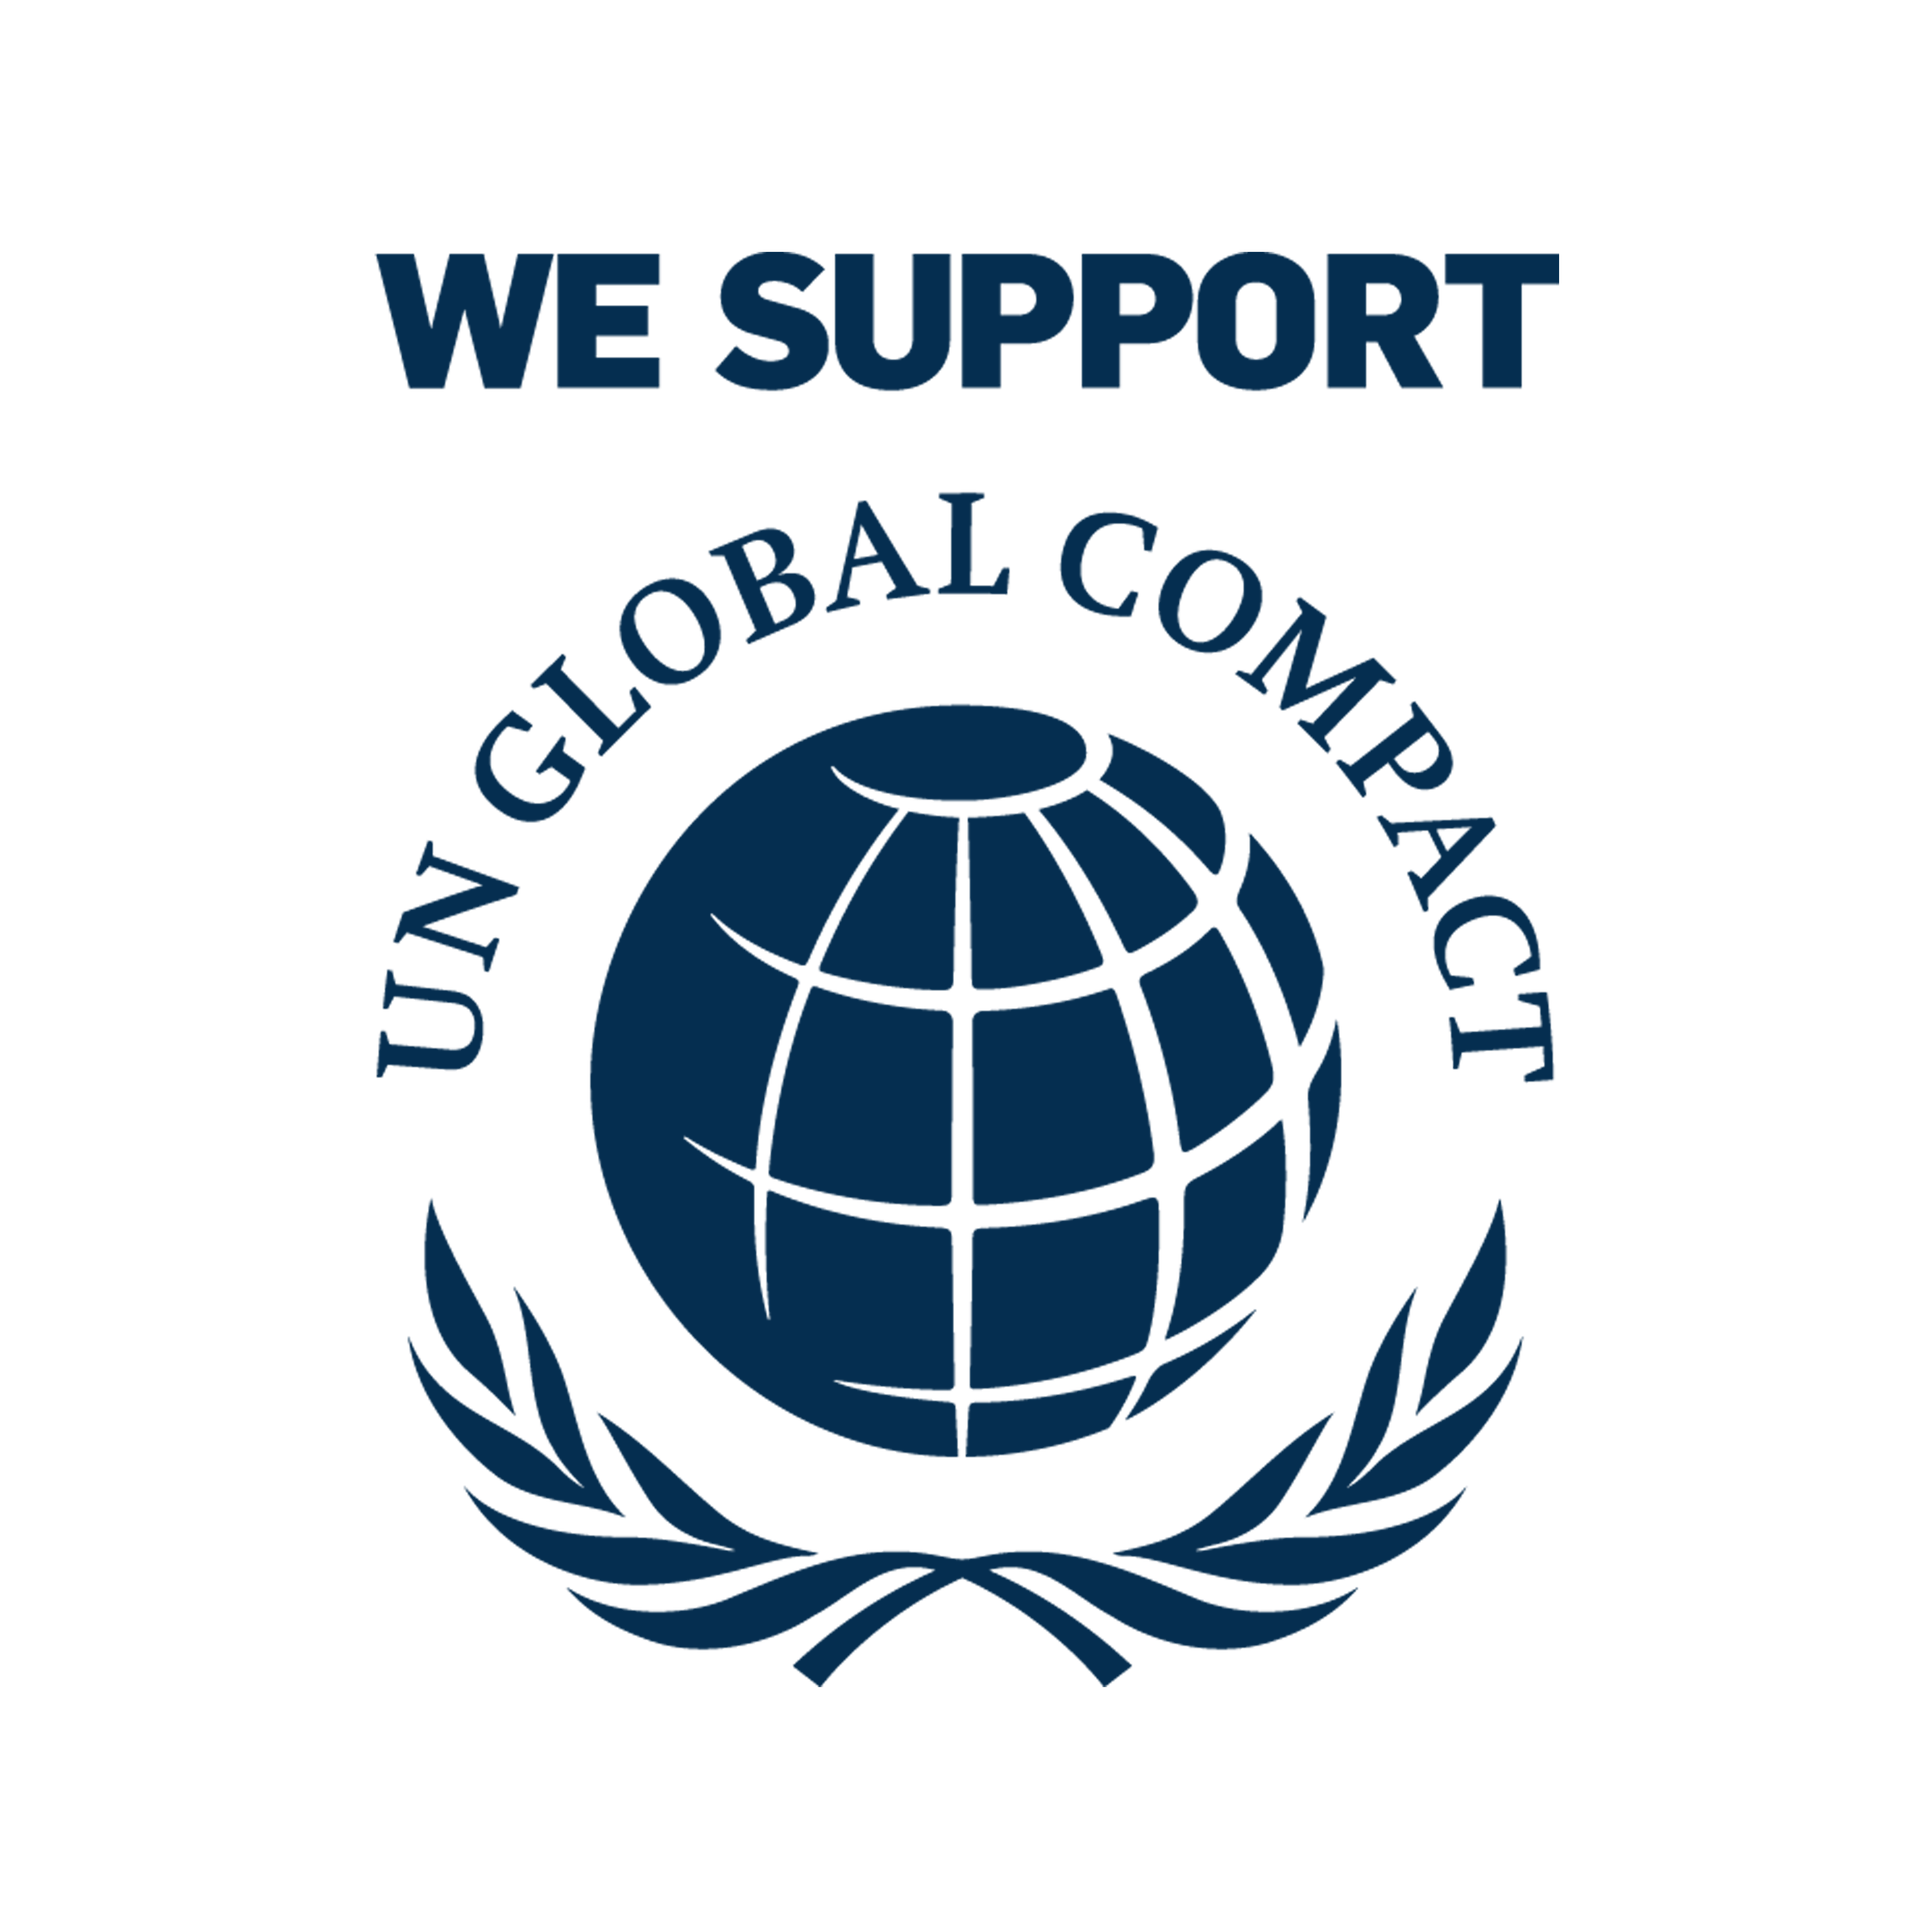 Diamond Packaging announced that it has joined the United Nations Global Compact initiative.